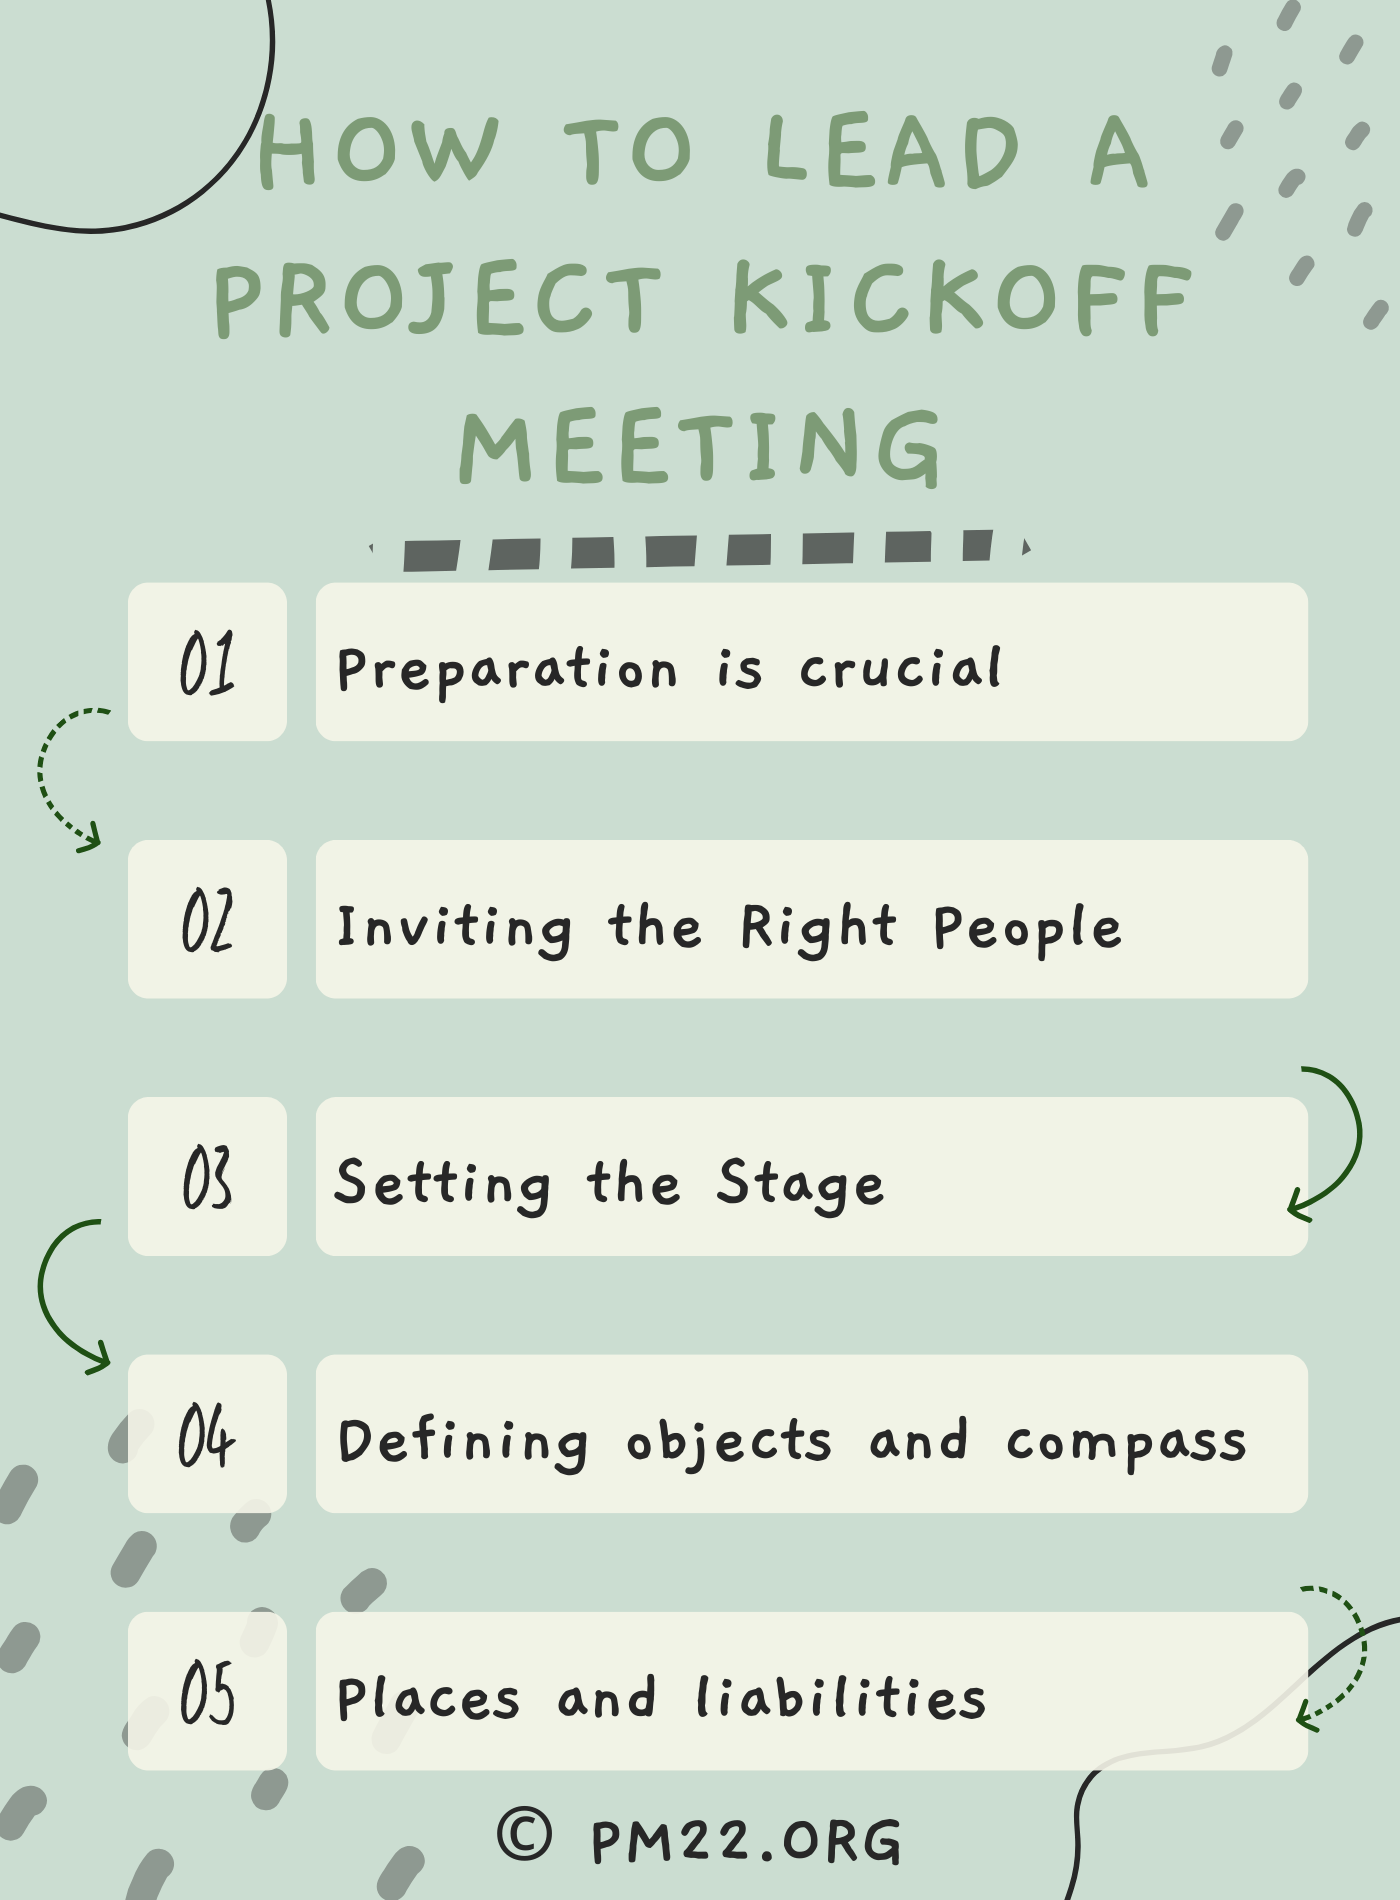 How to Lead a Project Kickoff Meeting